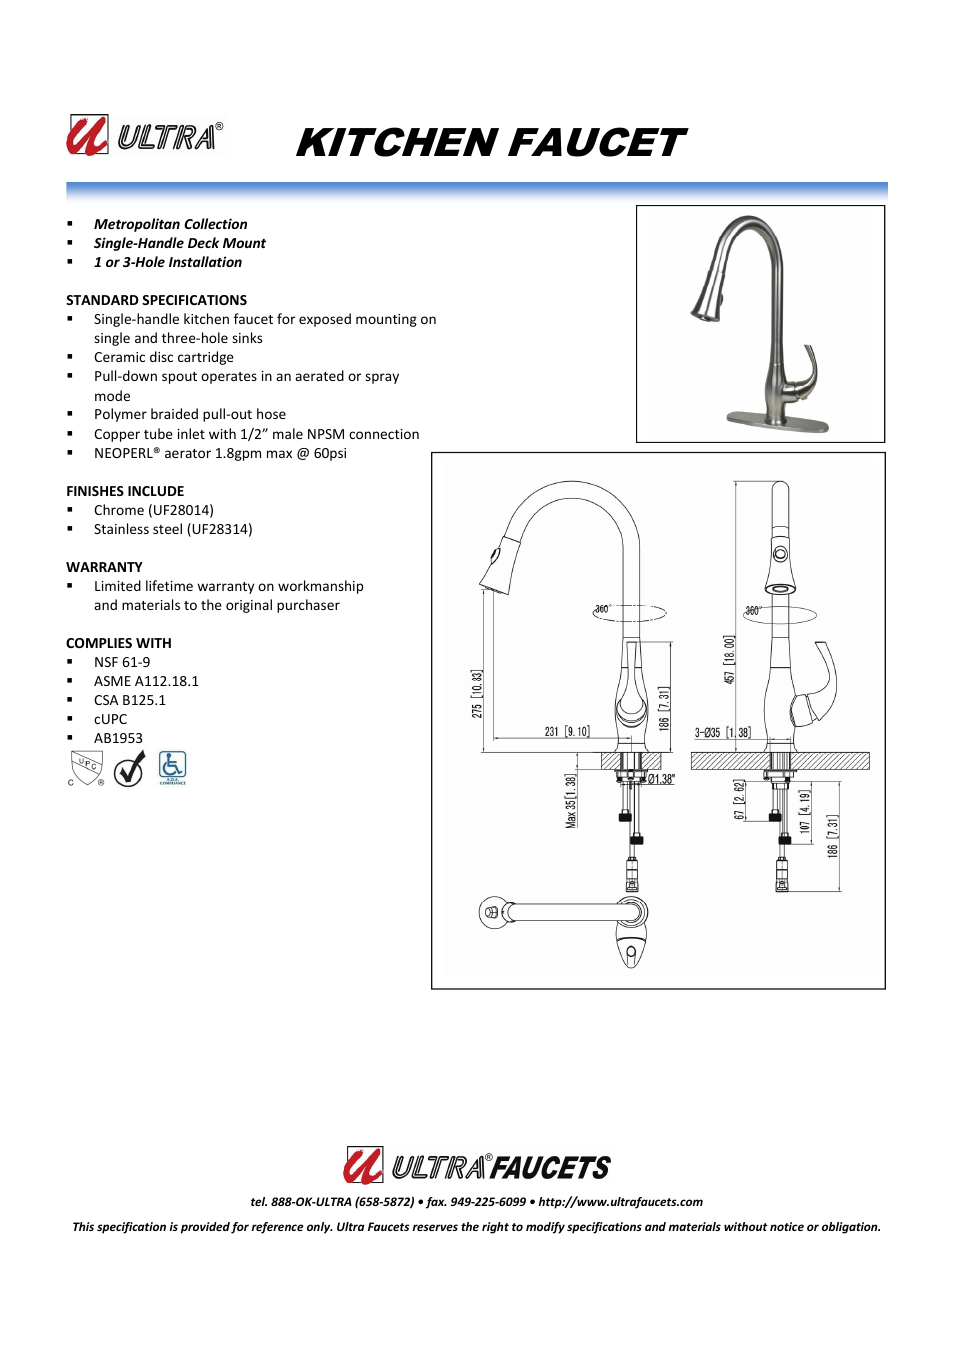 "METROPOLITAN COLLECTIONSINGLE-HANDLE KITCHEN FAUCET WITH PULL-DOWN SPRAY"